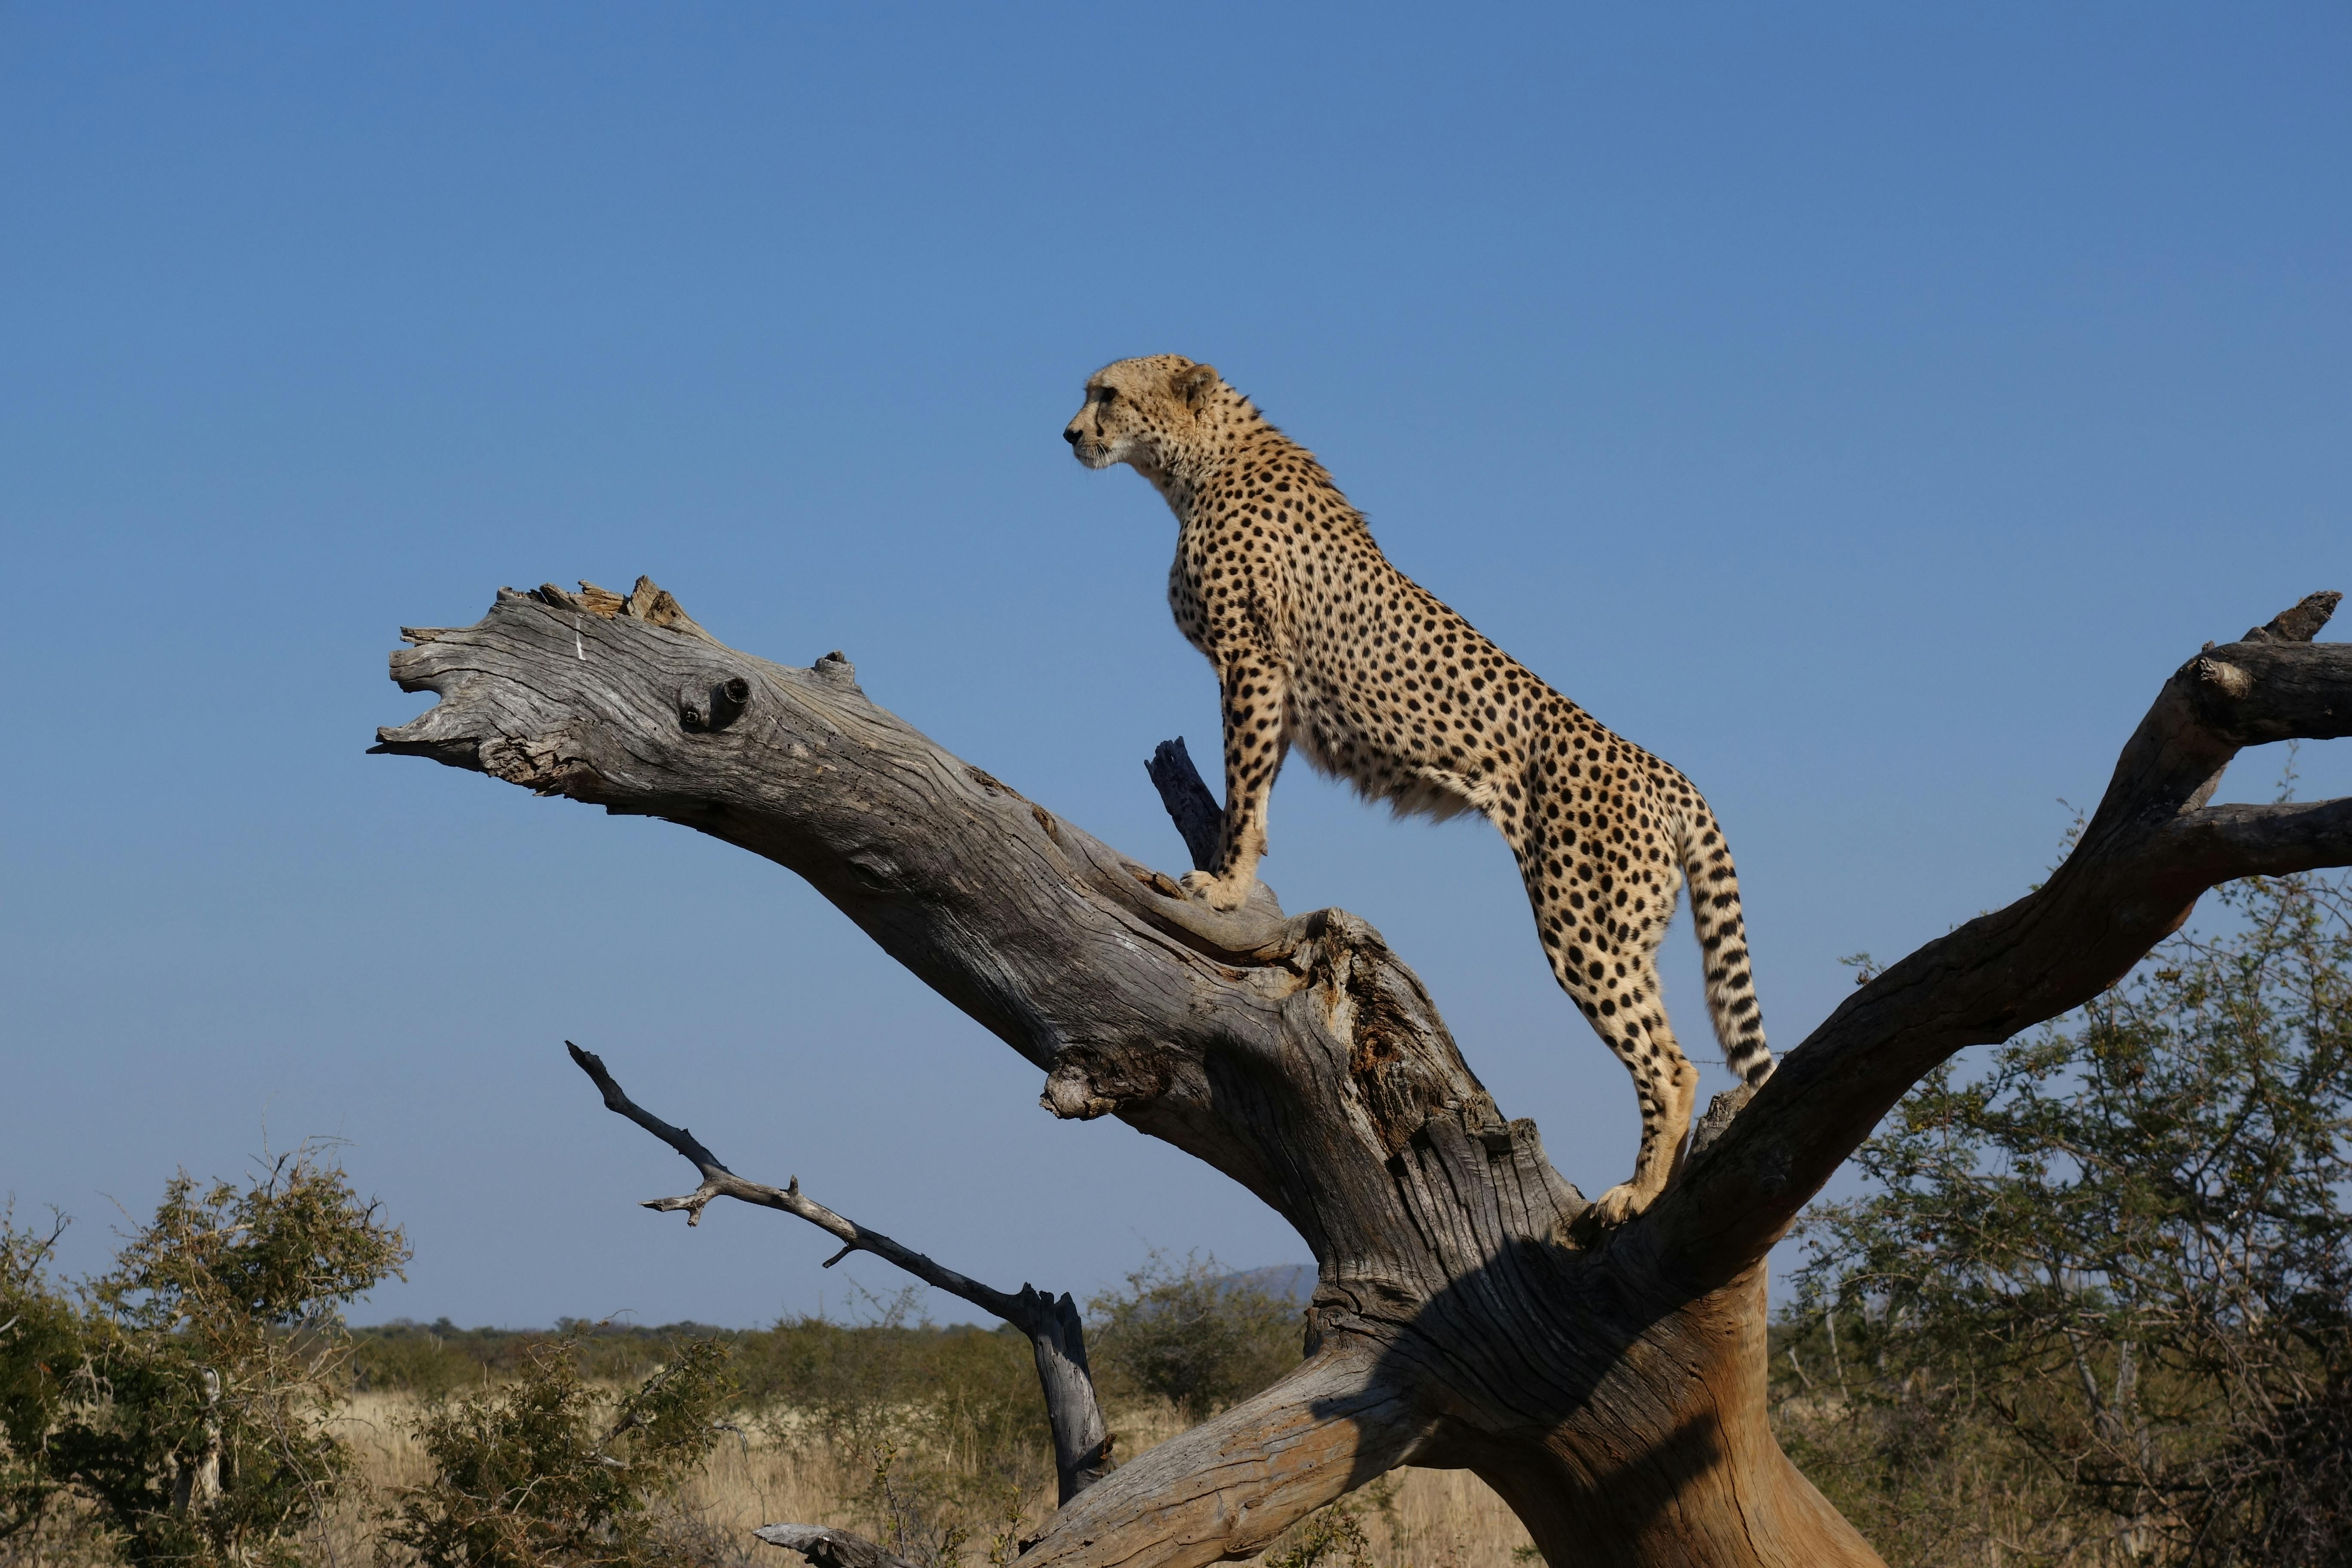 fastest land animal in the world after cheetah